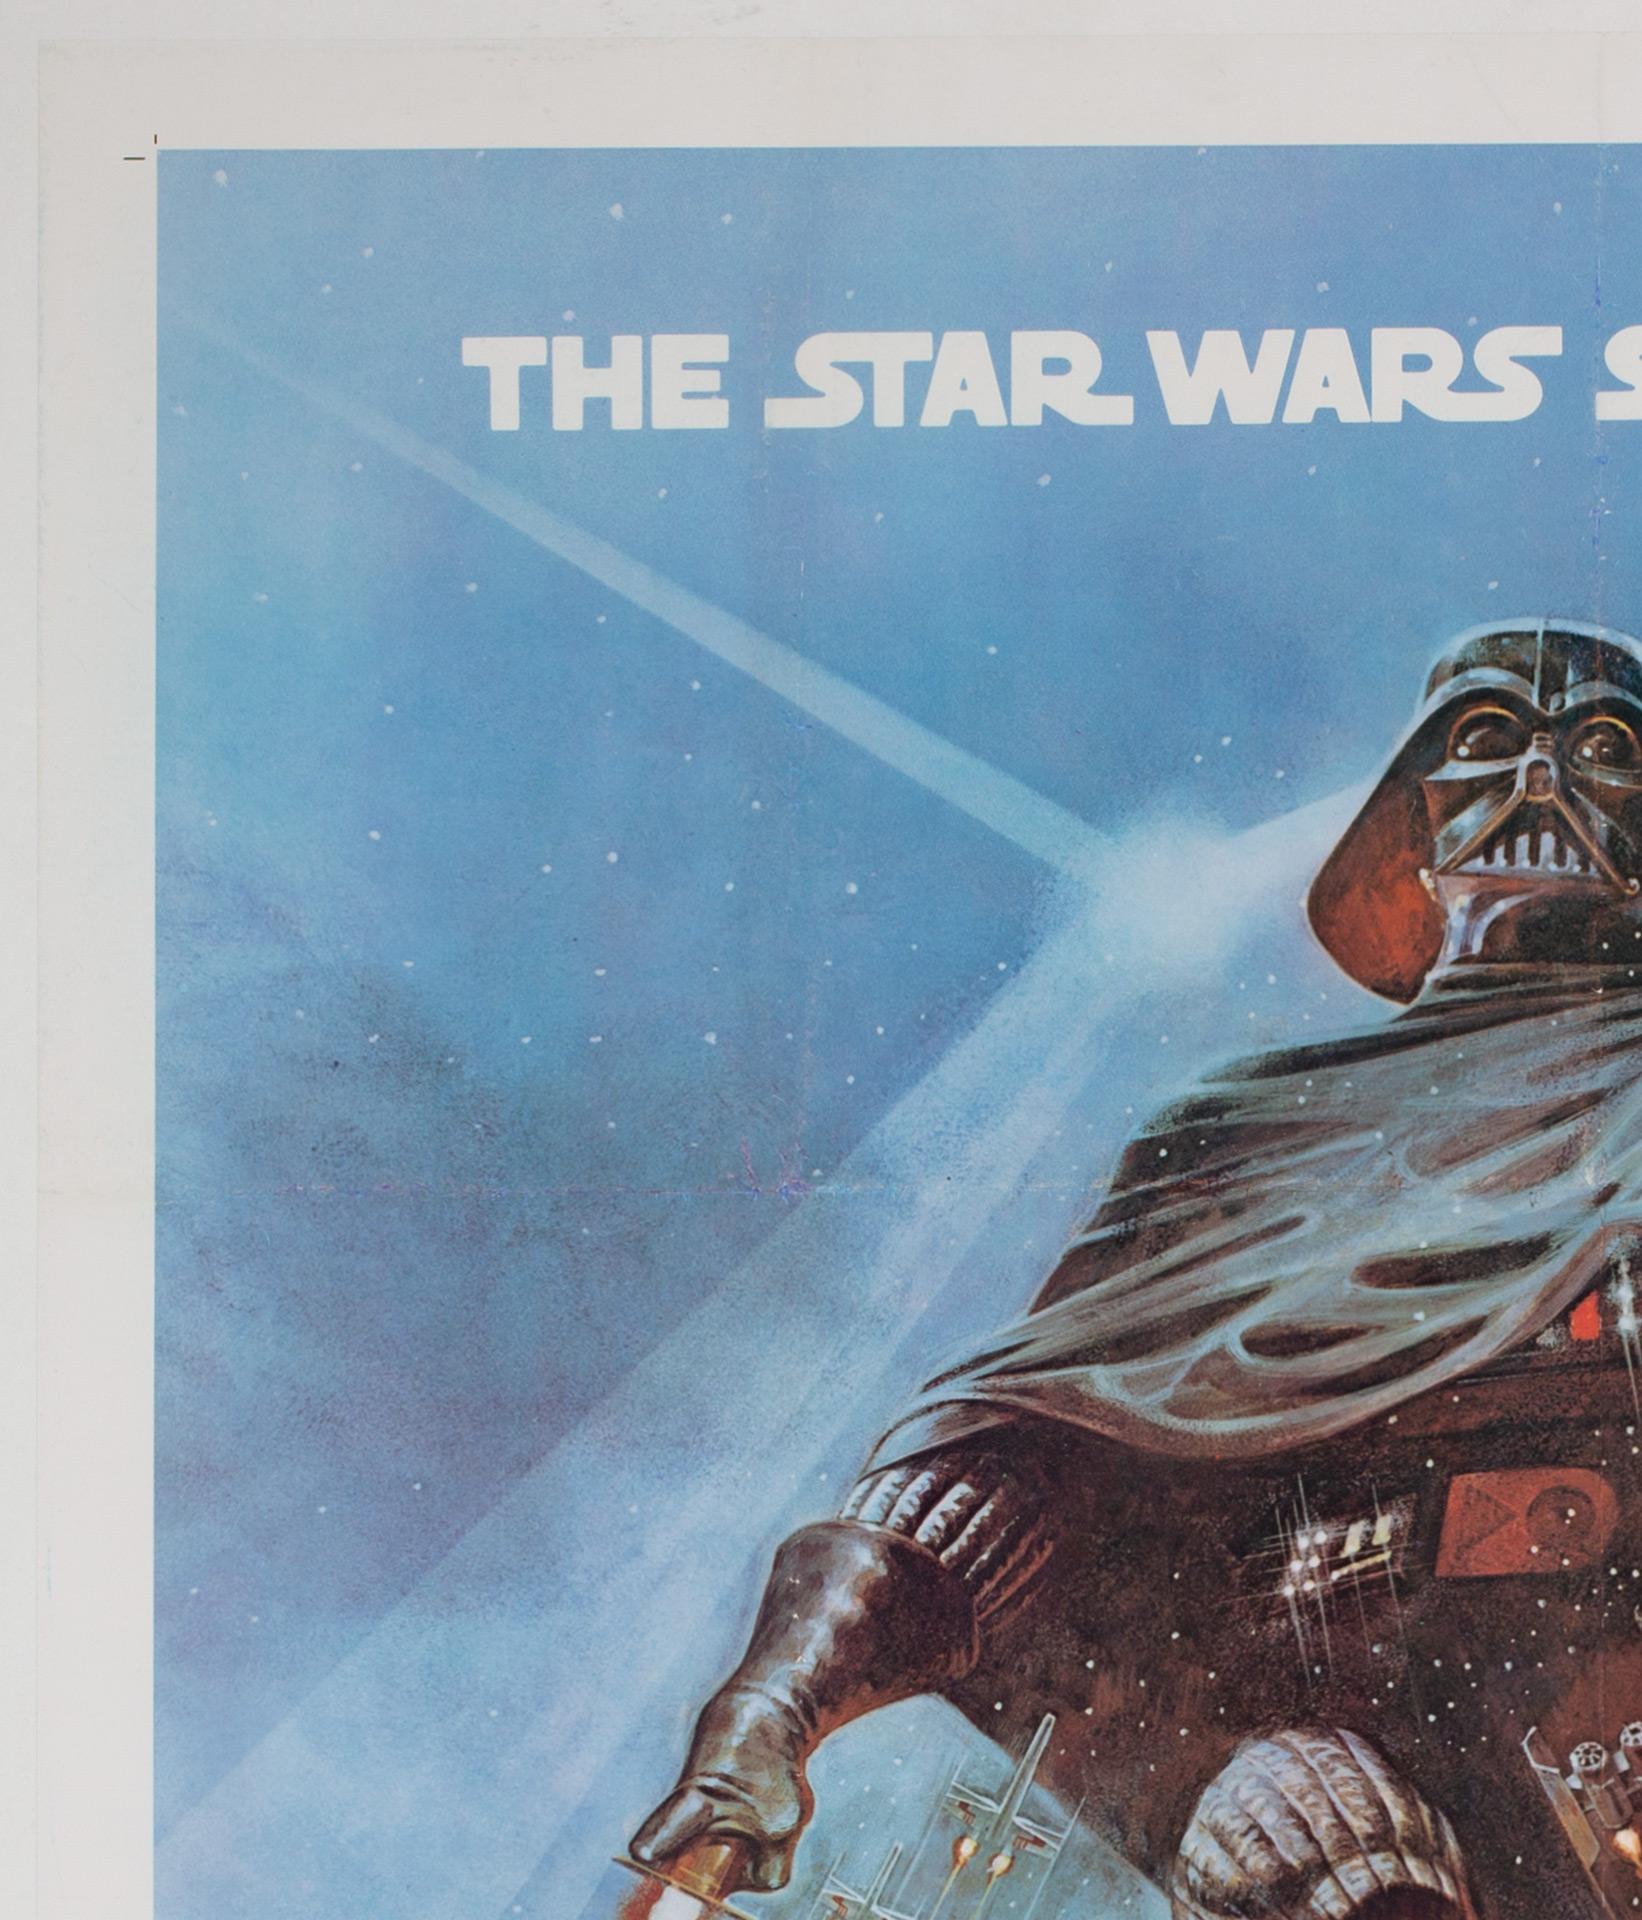 American The Empire Strikes Back 1980 US 1 Sheet Style B Film Poster, Jung, Linen Backed